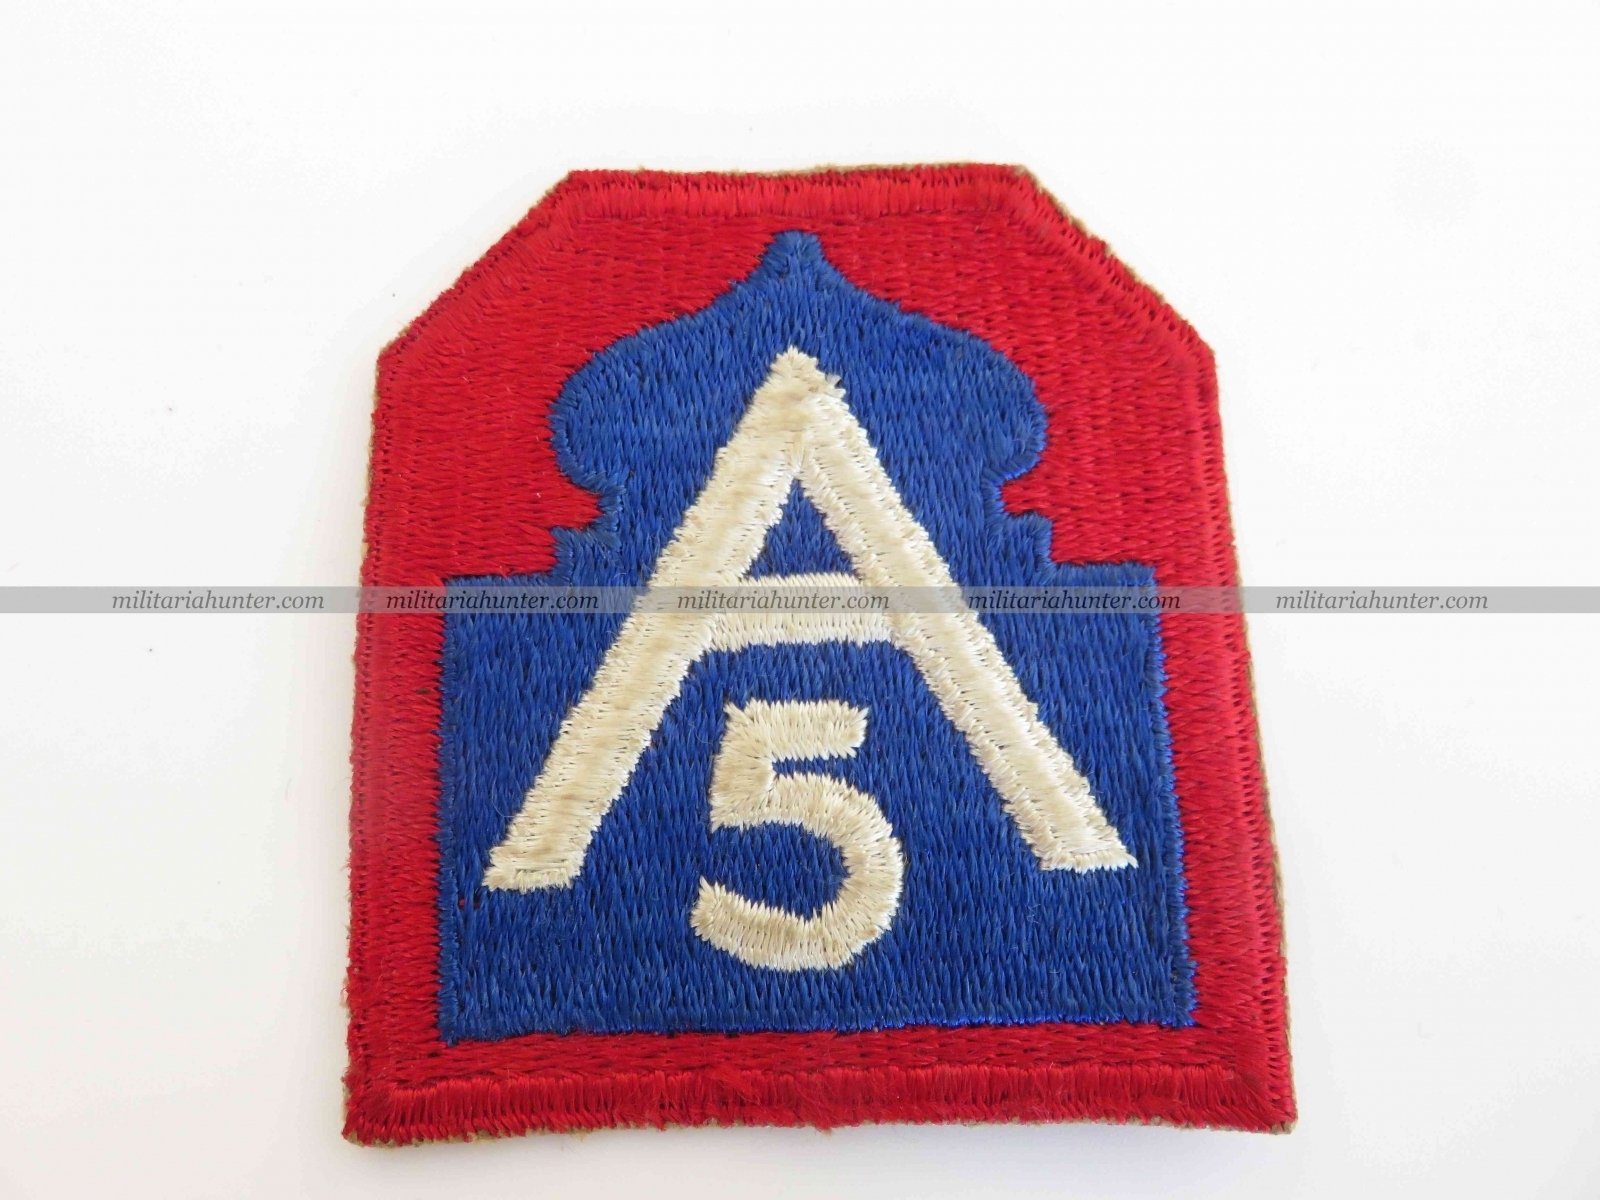 militaria : 5th Army patch - post war made